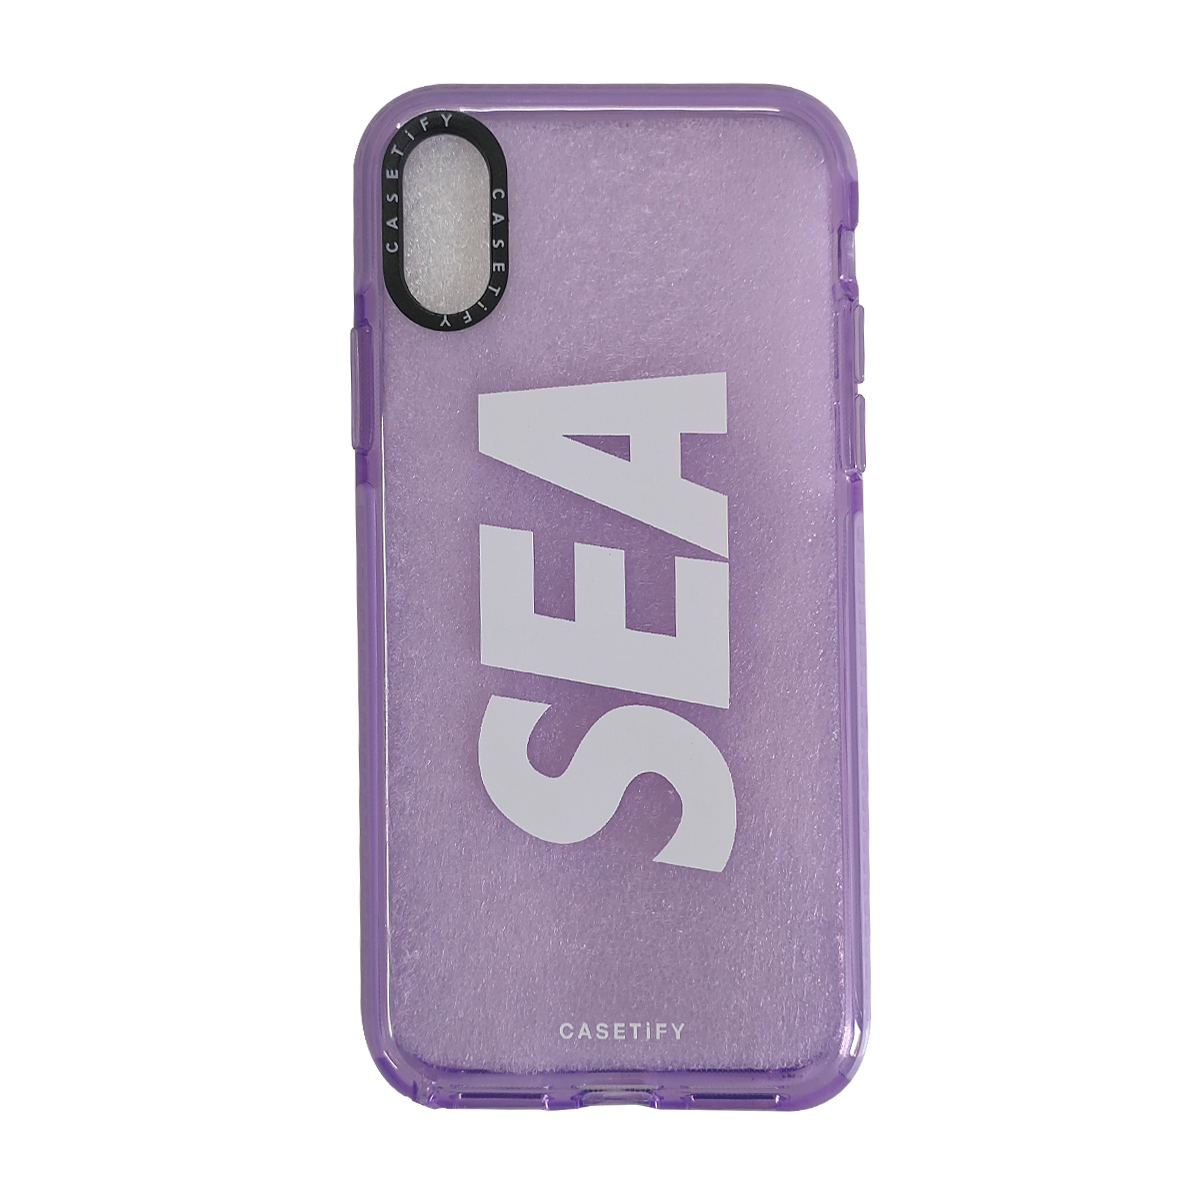 Casetify Sea Case for iPhone X/XS/10 (Purple)